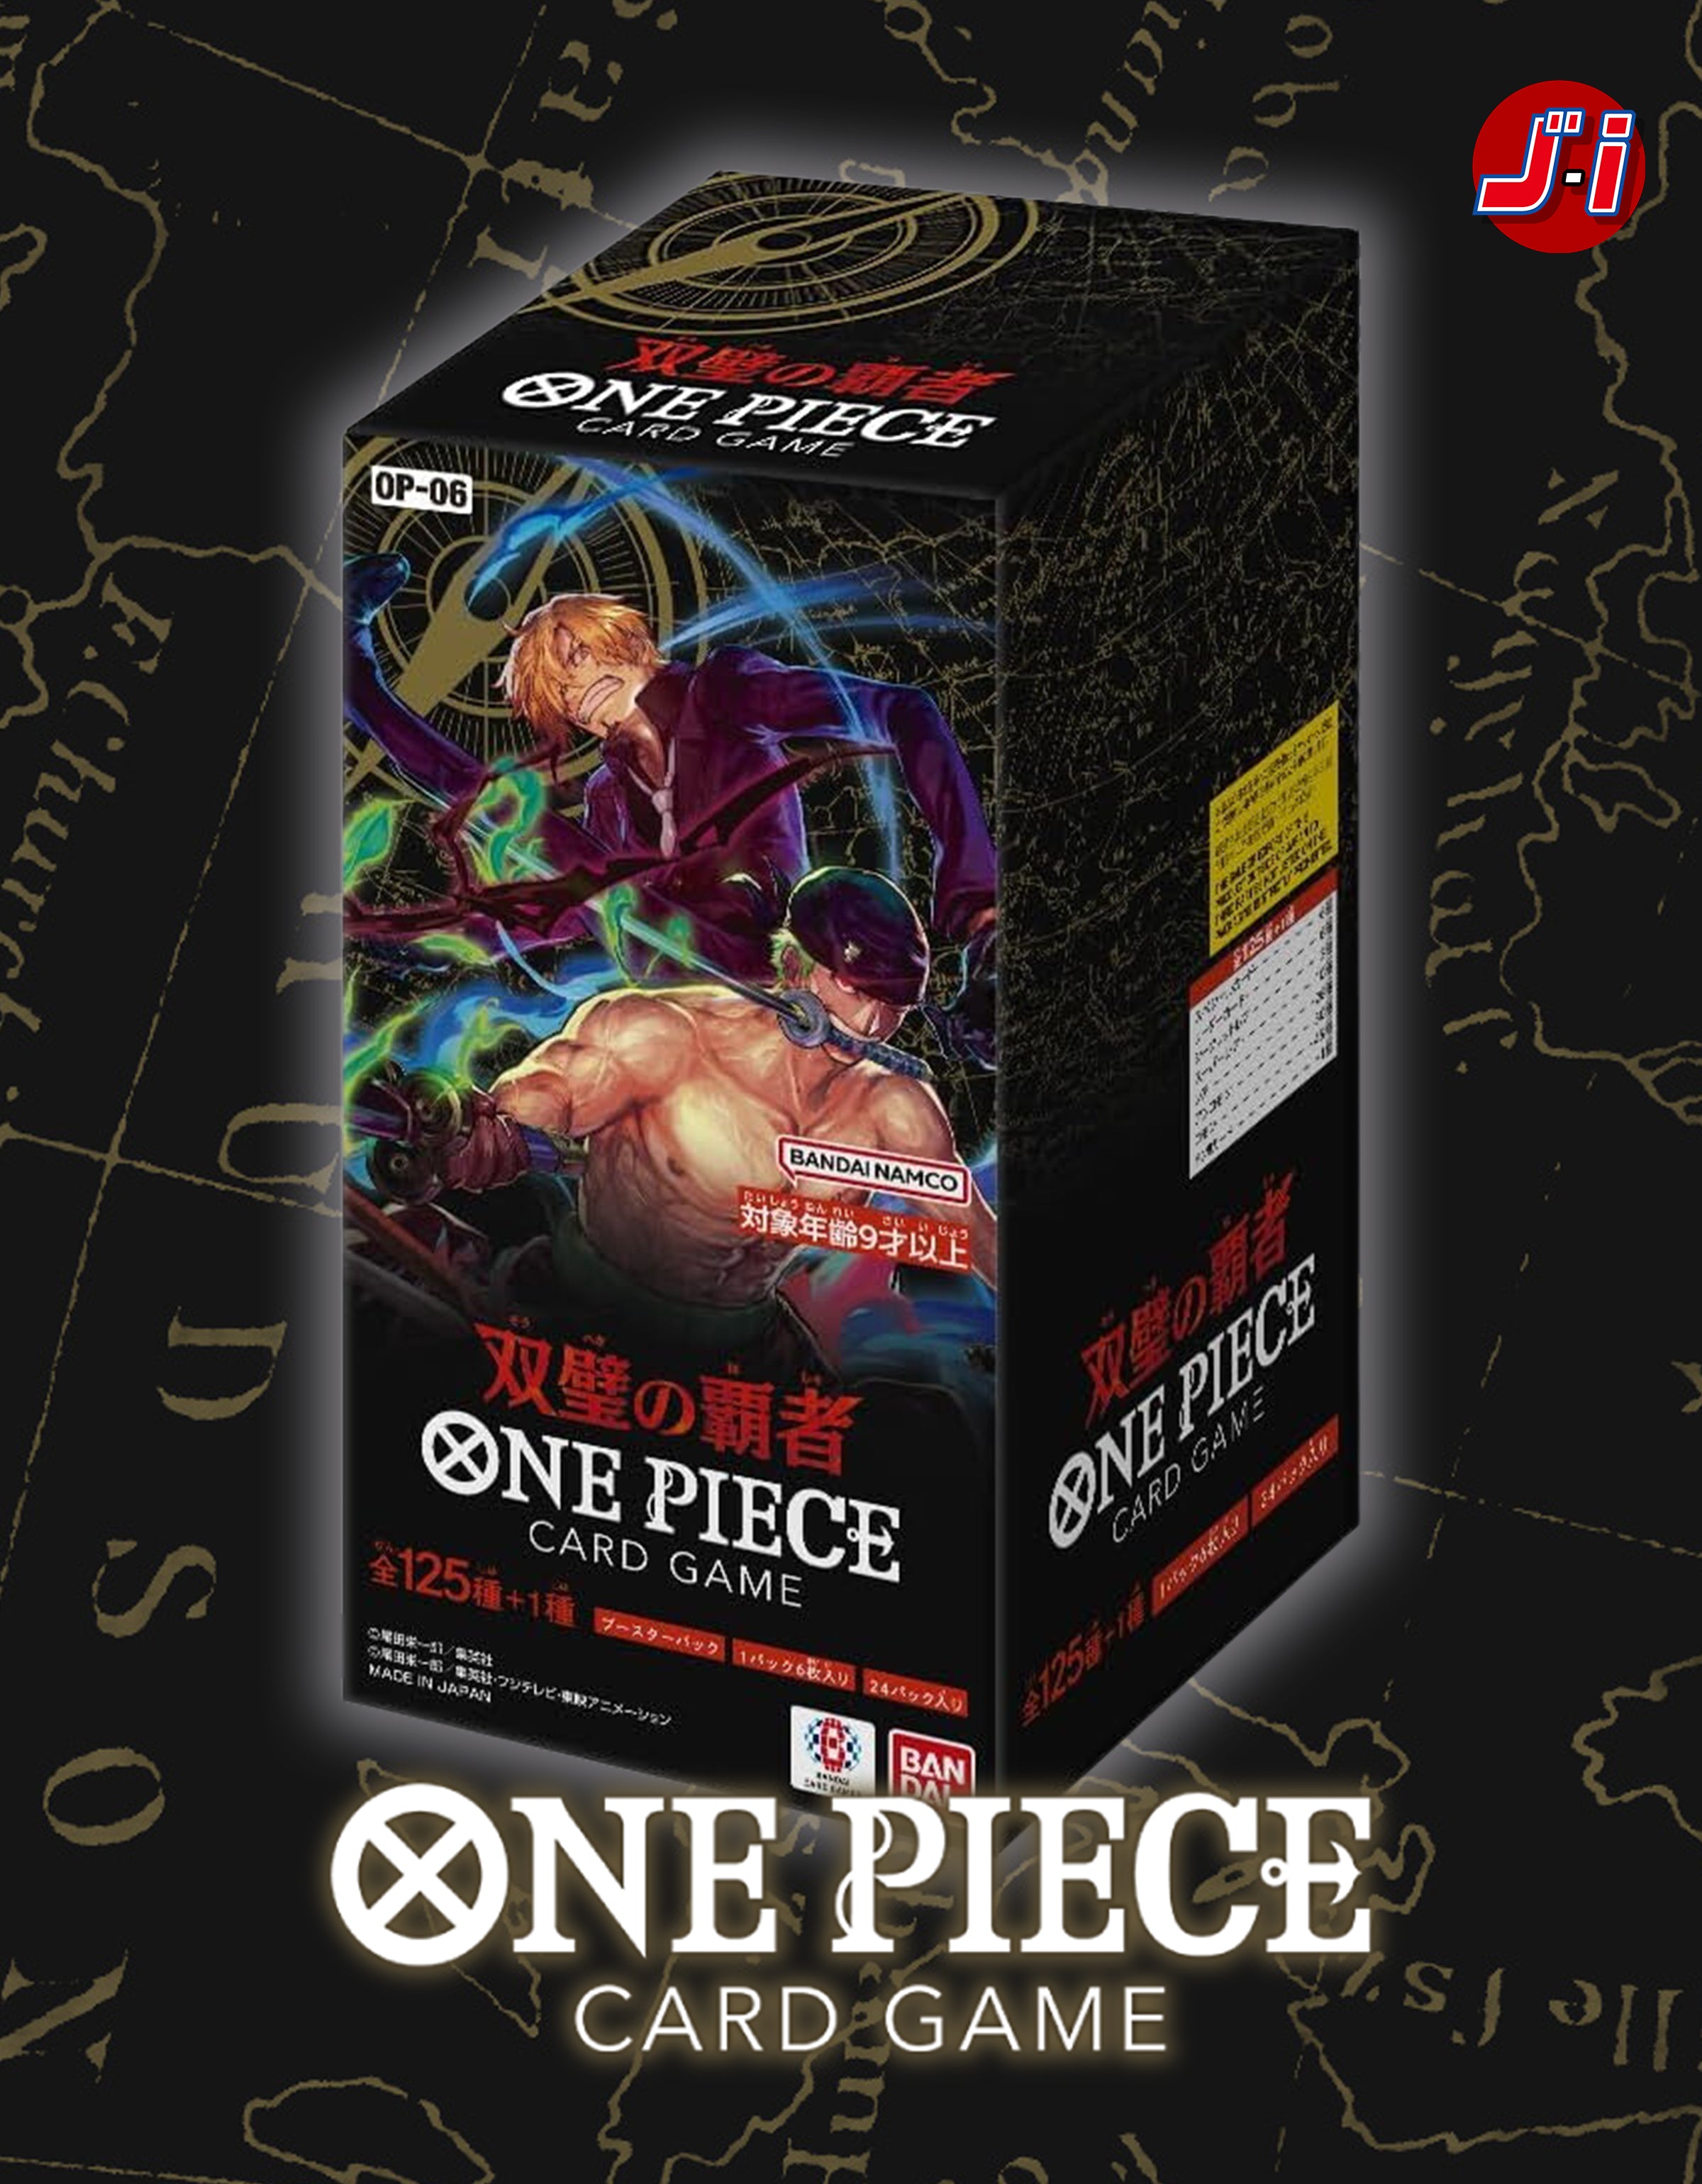 ONE PIECE CARD GAME - WINGS OF THE CAPTAIN OP-06 (BOX)